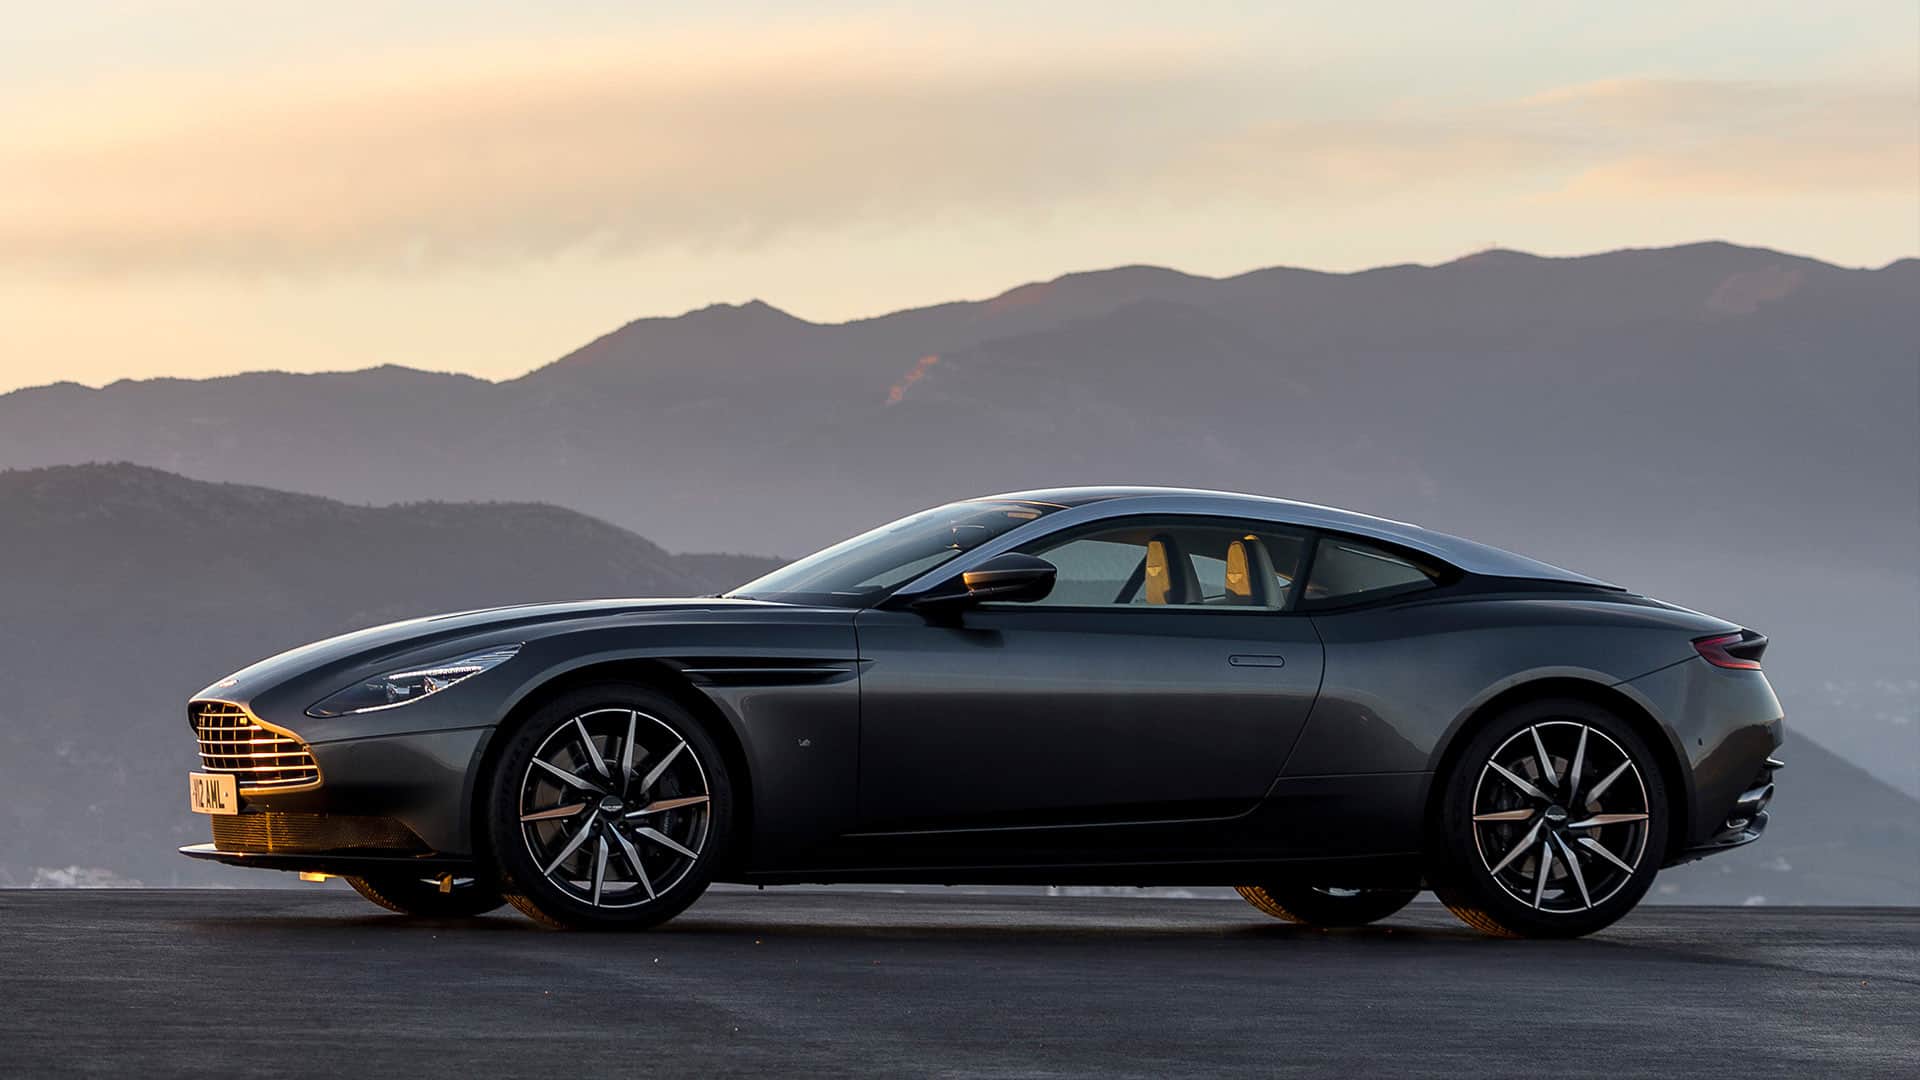 The Aston-Martn DB11 is claimed to be the company's mst powerful, fuel-efficient as fastest-accelerating model ever